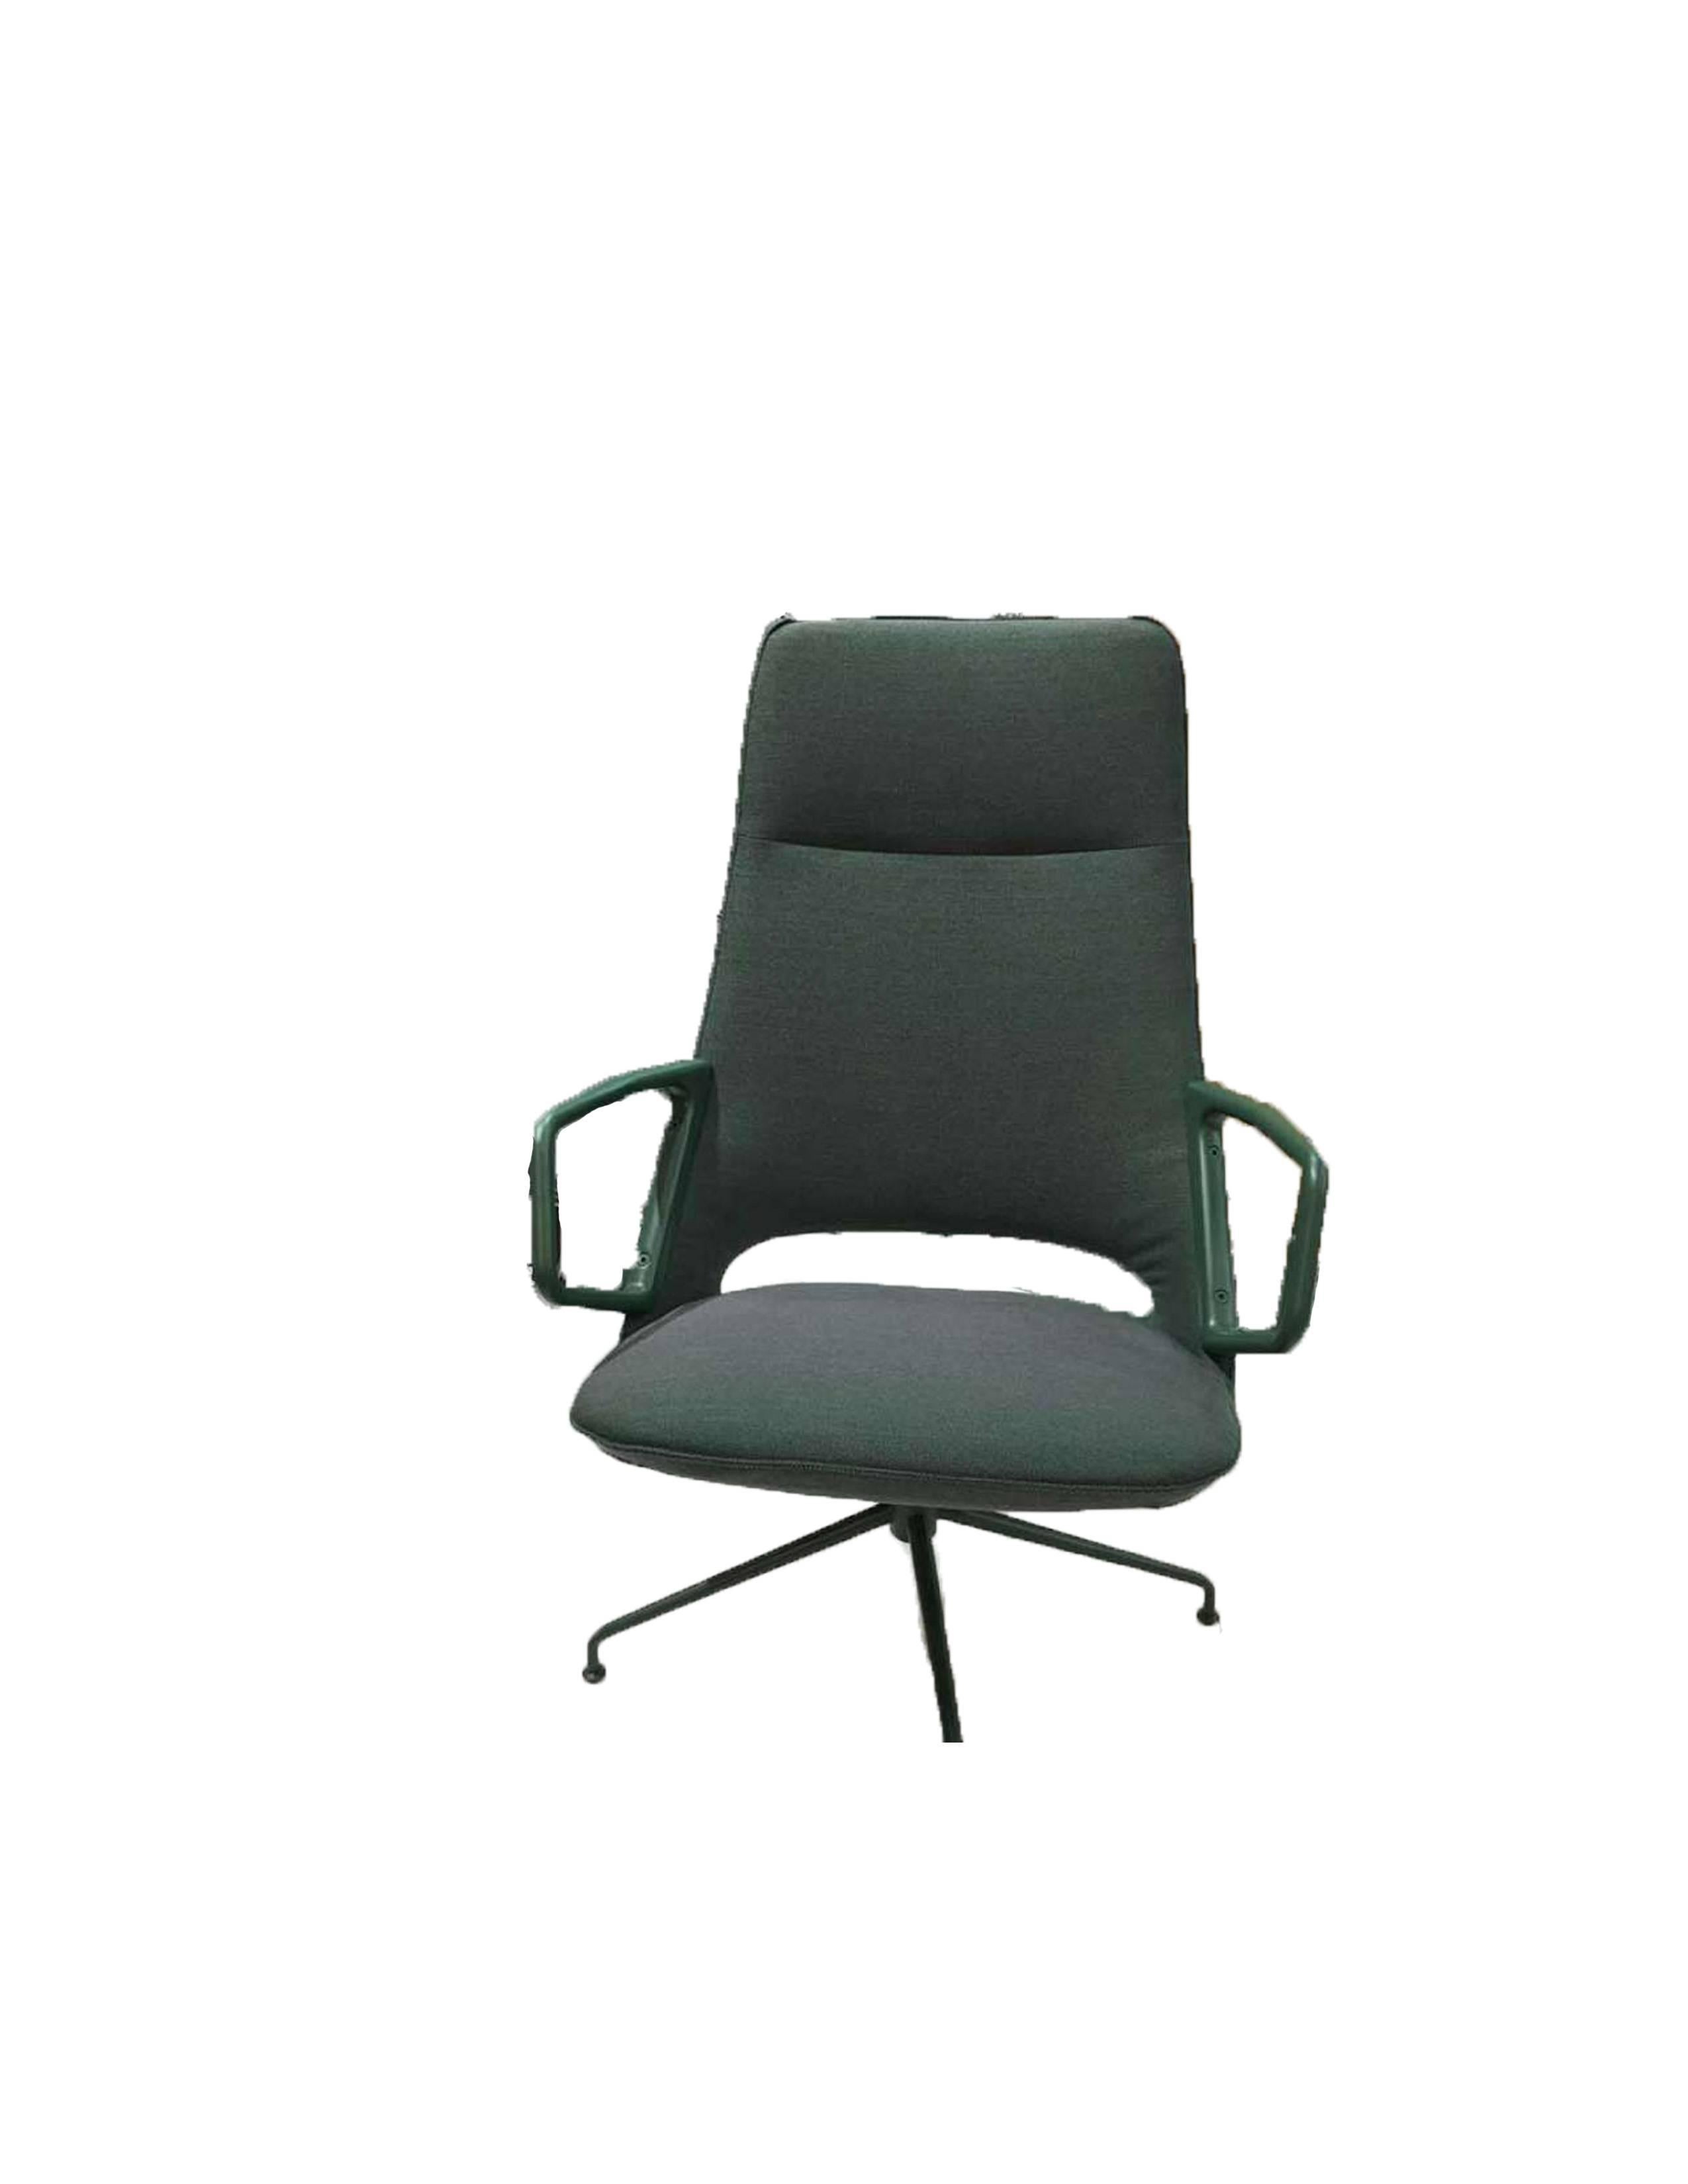 Zuma is Artifort’s new armchair designed by French designer Patrick Norguet. A soft and inviting, light and ergonomic chair, which was initially designed for offices. With its comfort and low back option it also works well at home. Upholstered in